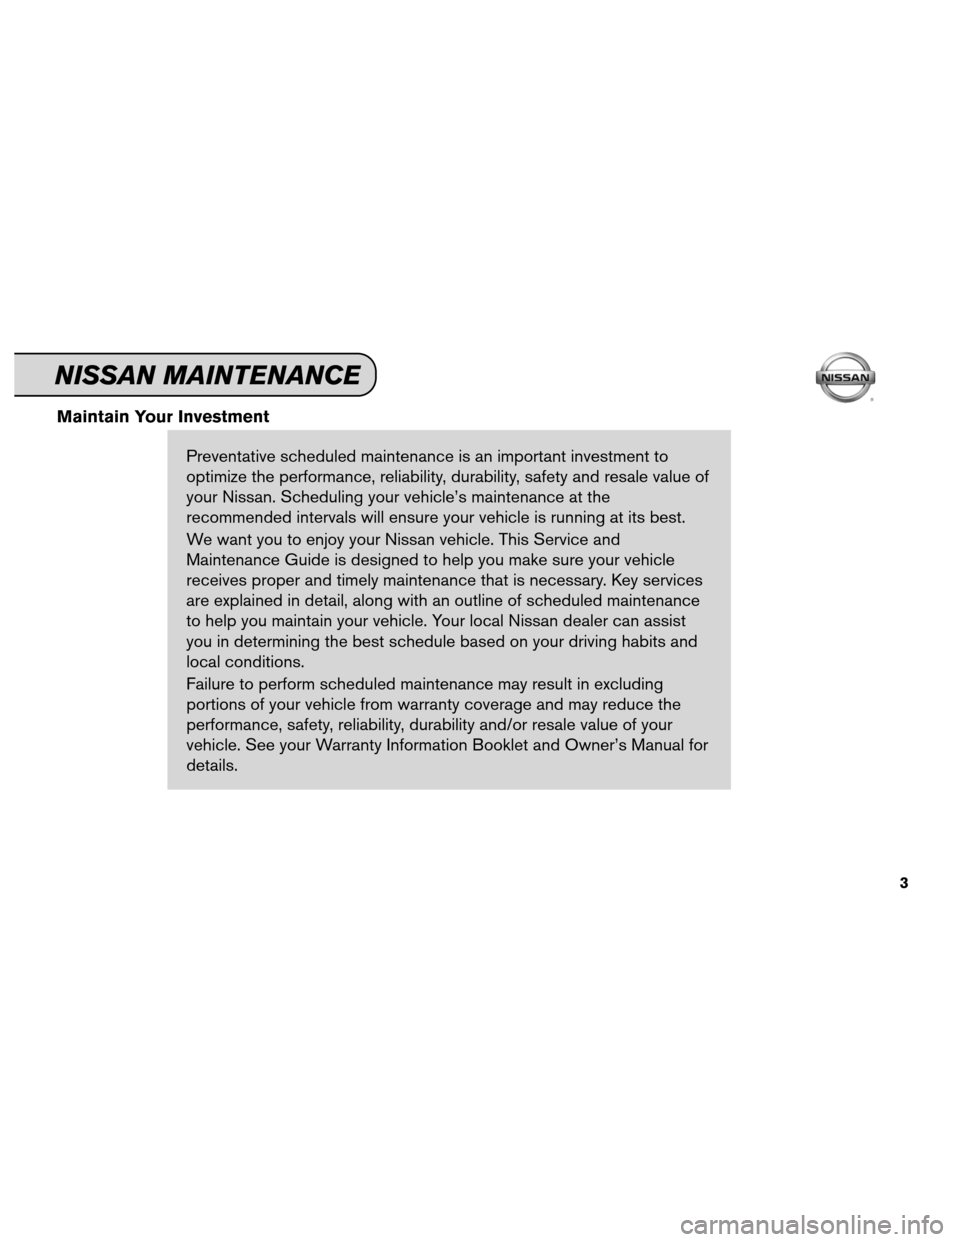 NISSAN ALTIMA COUPE 2012 D32 / 4.G Service And Maintenance Guide Maintain Your InvestmentPreventative scheduled maintenance is an important investment to
optimize the performance, reliability, durability, safety and resale value of
your Nissan. Scheduling your vehi